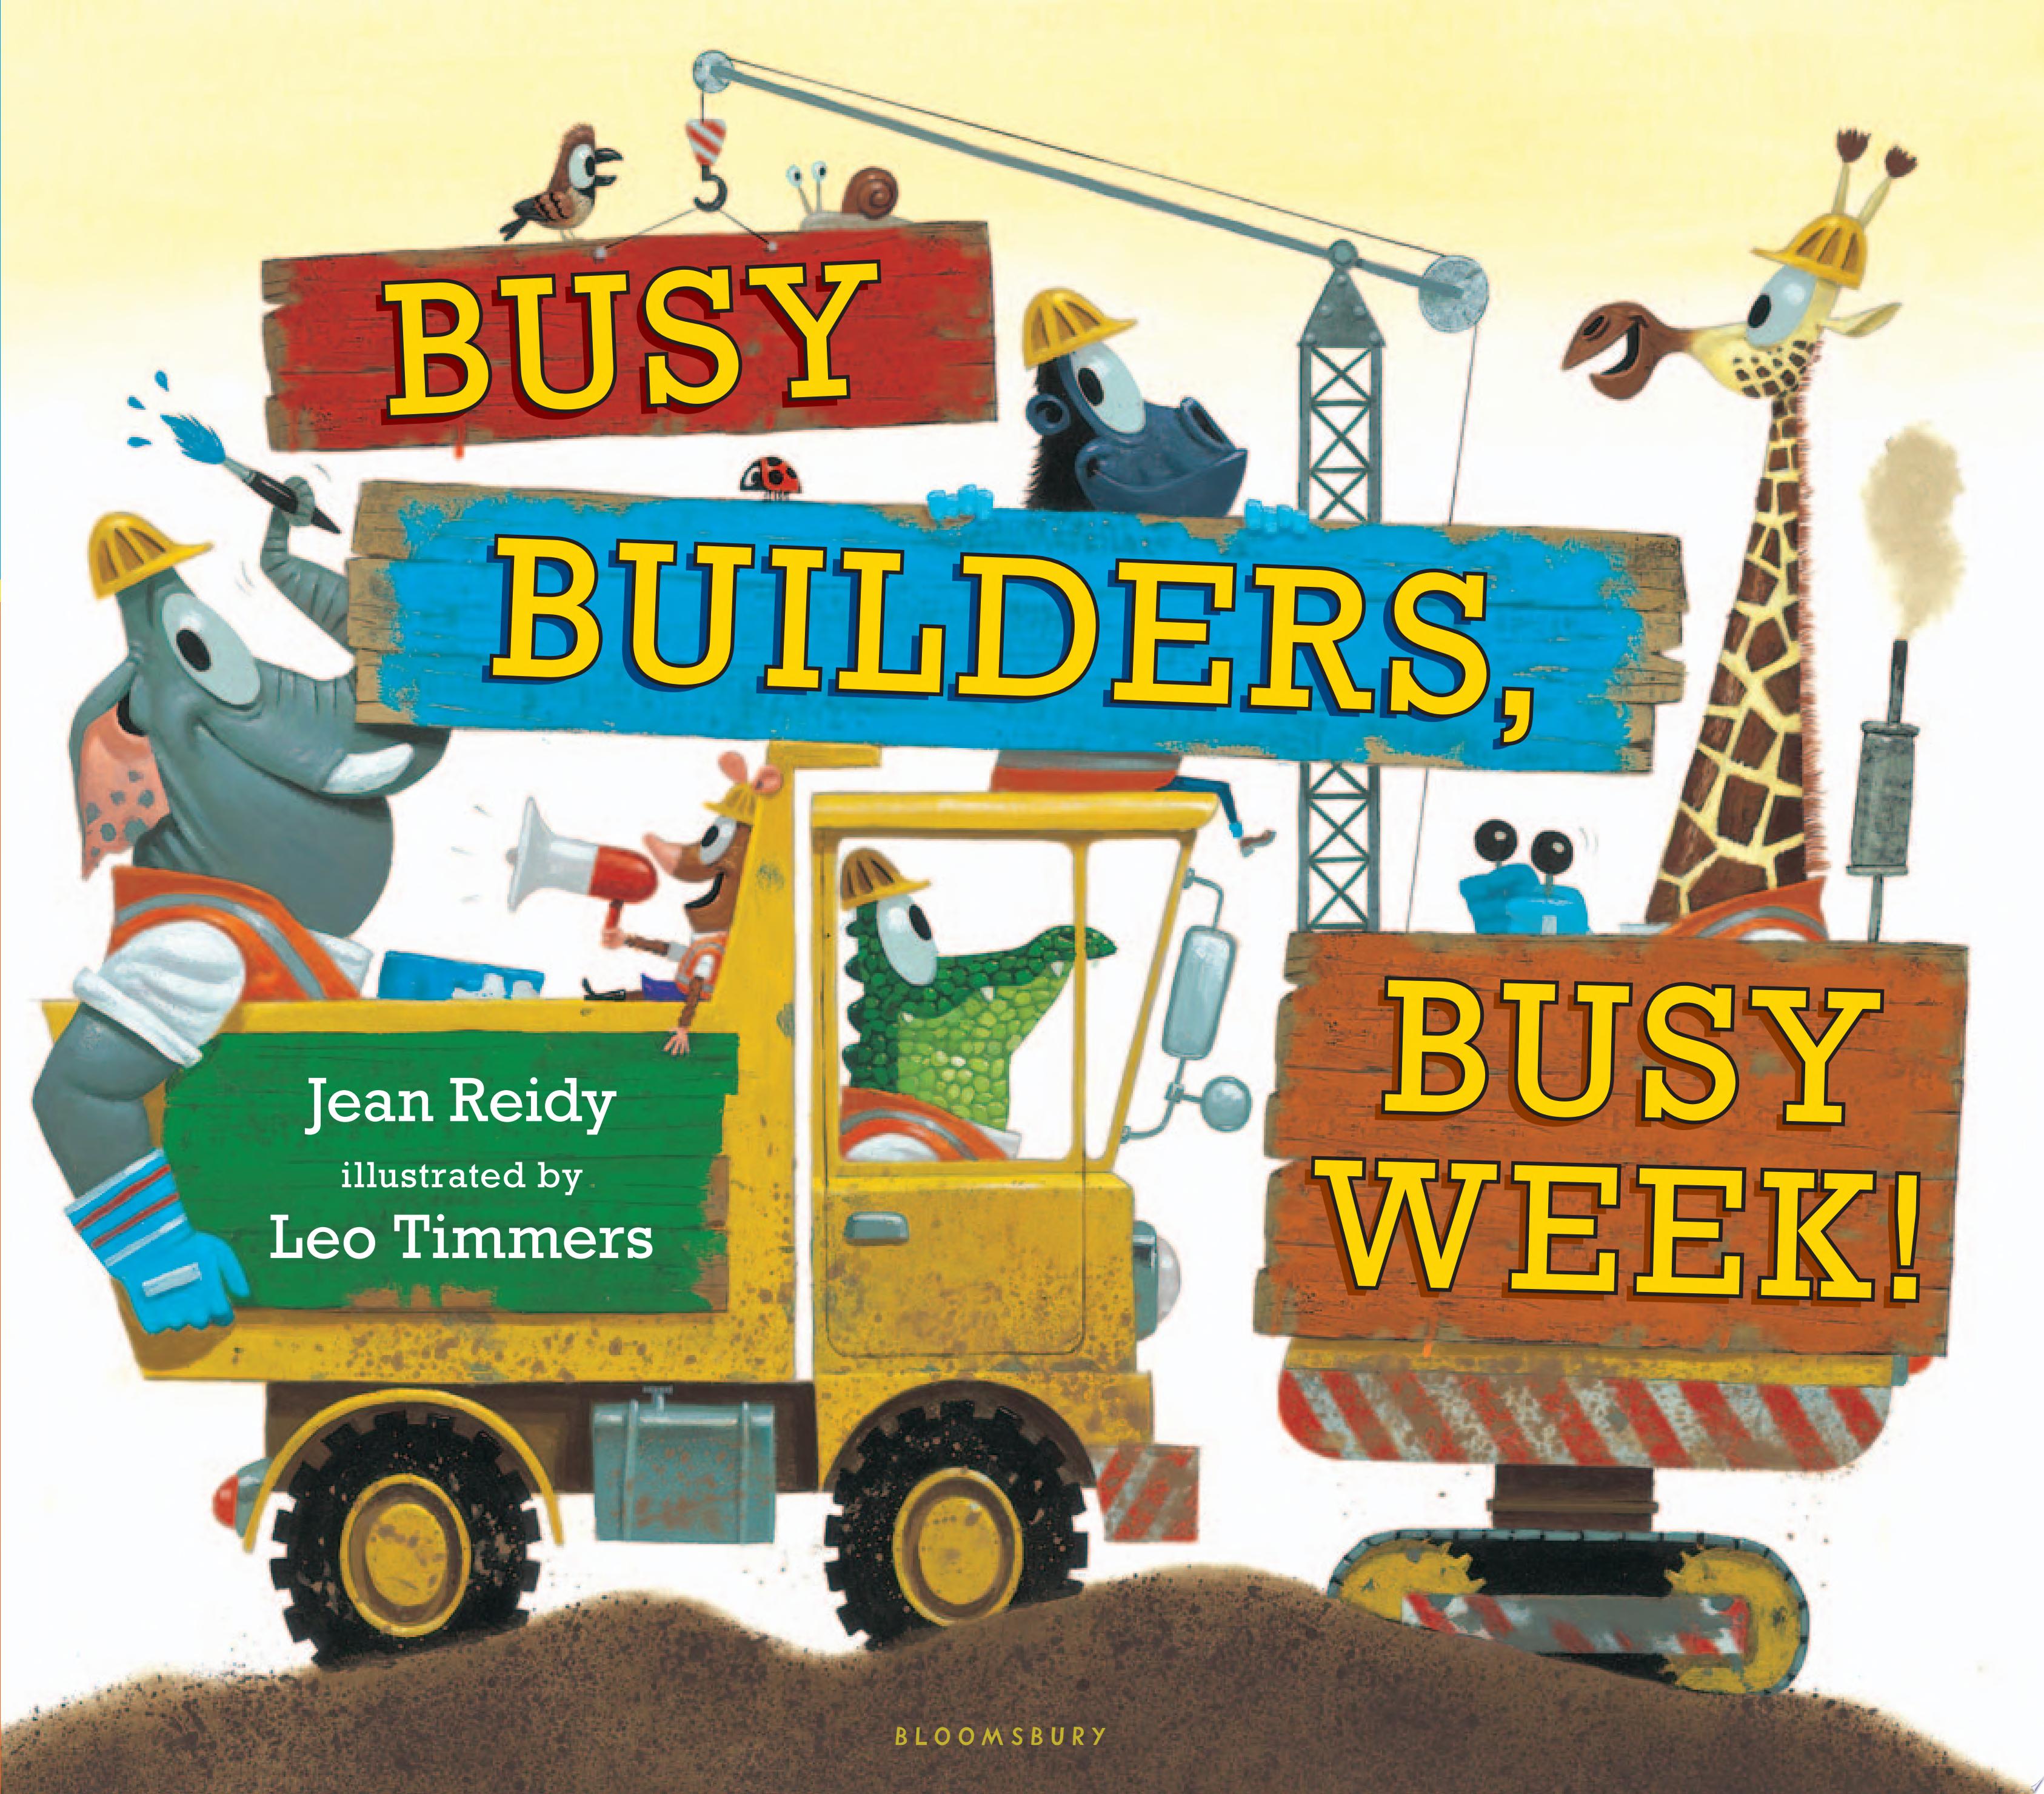 Image for "Busy Builders, Busy Week!"